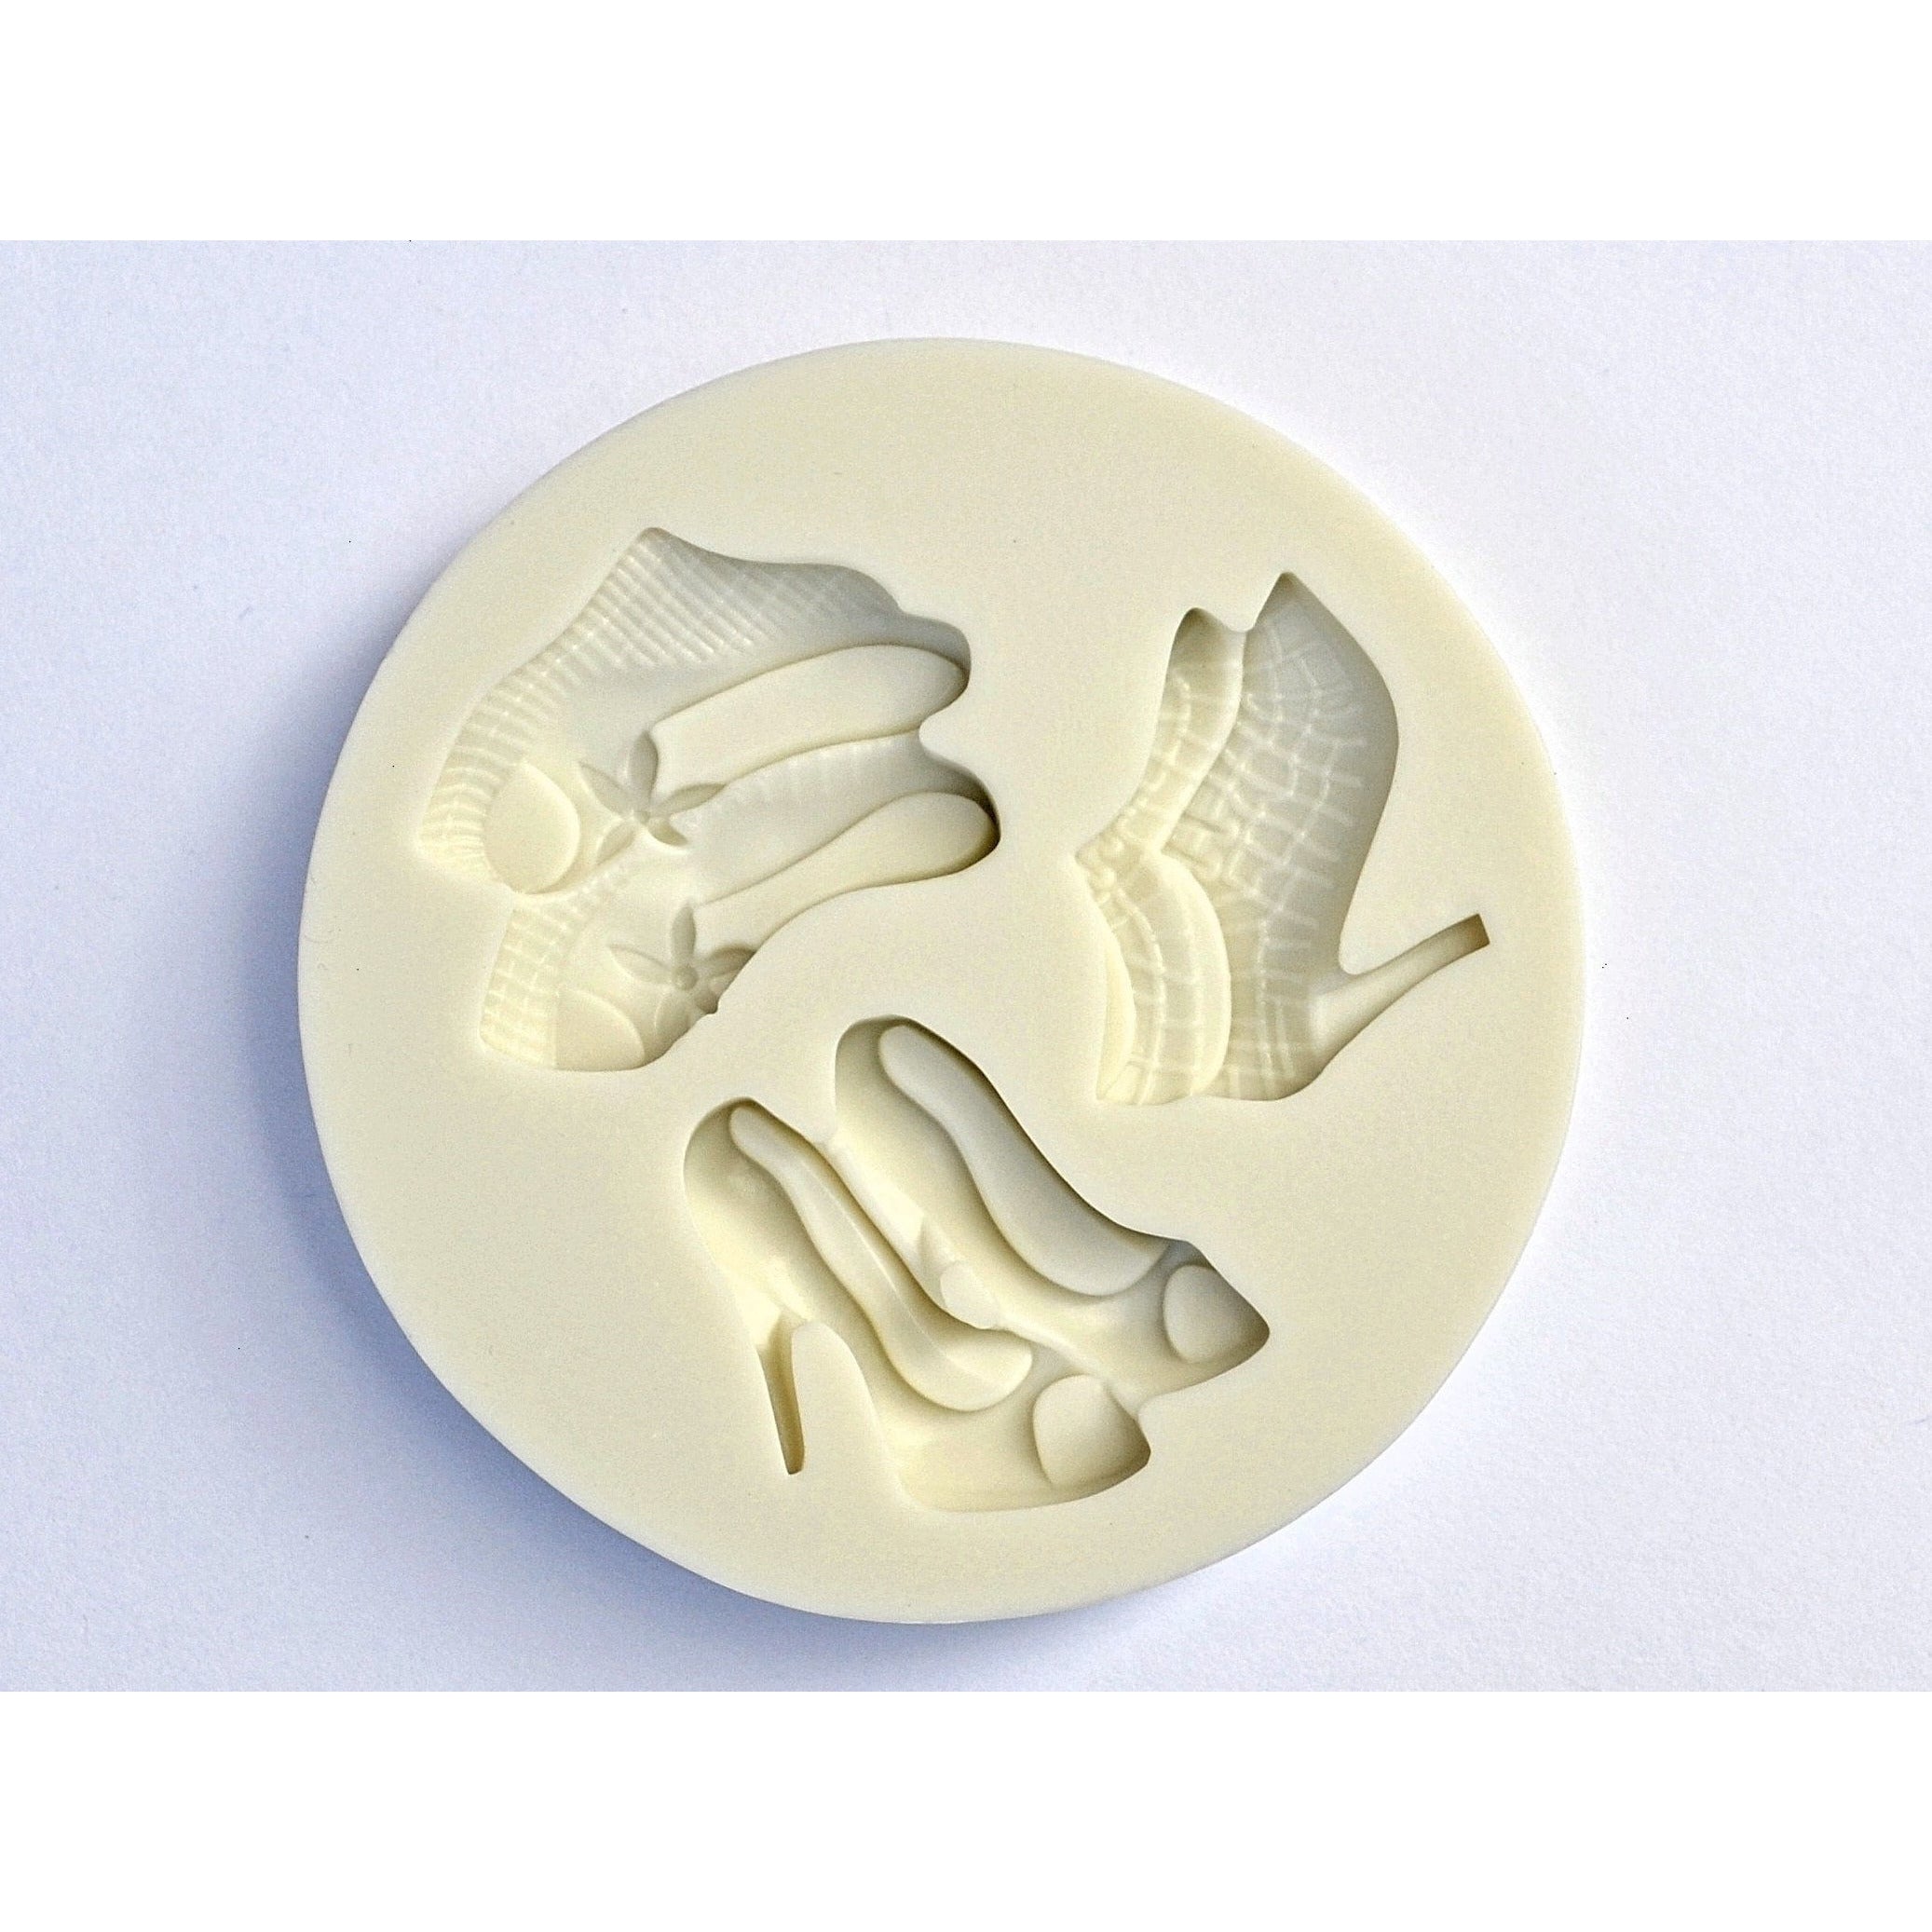 Shop Fashion Silicone Molds Online